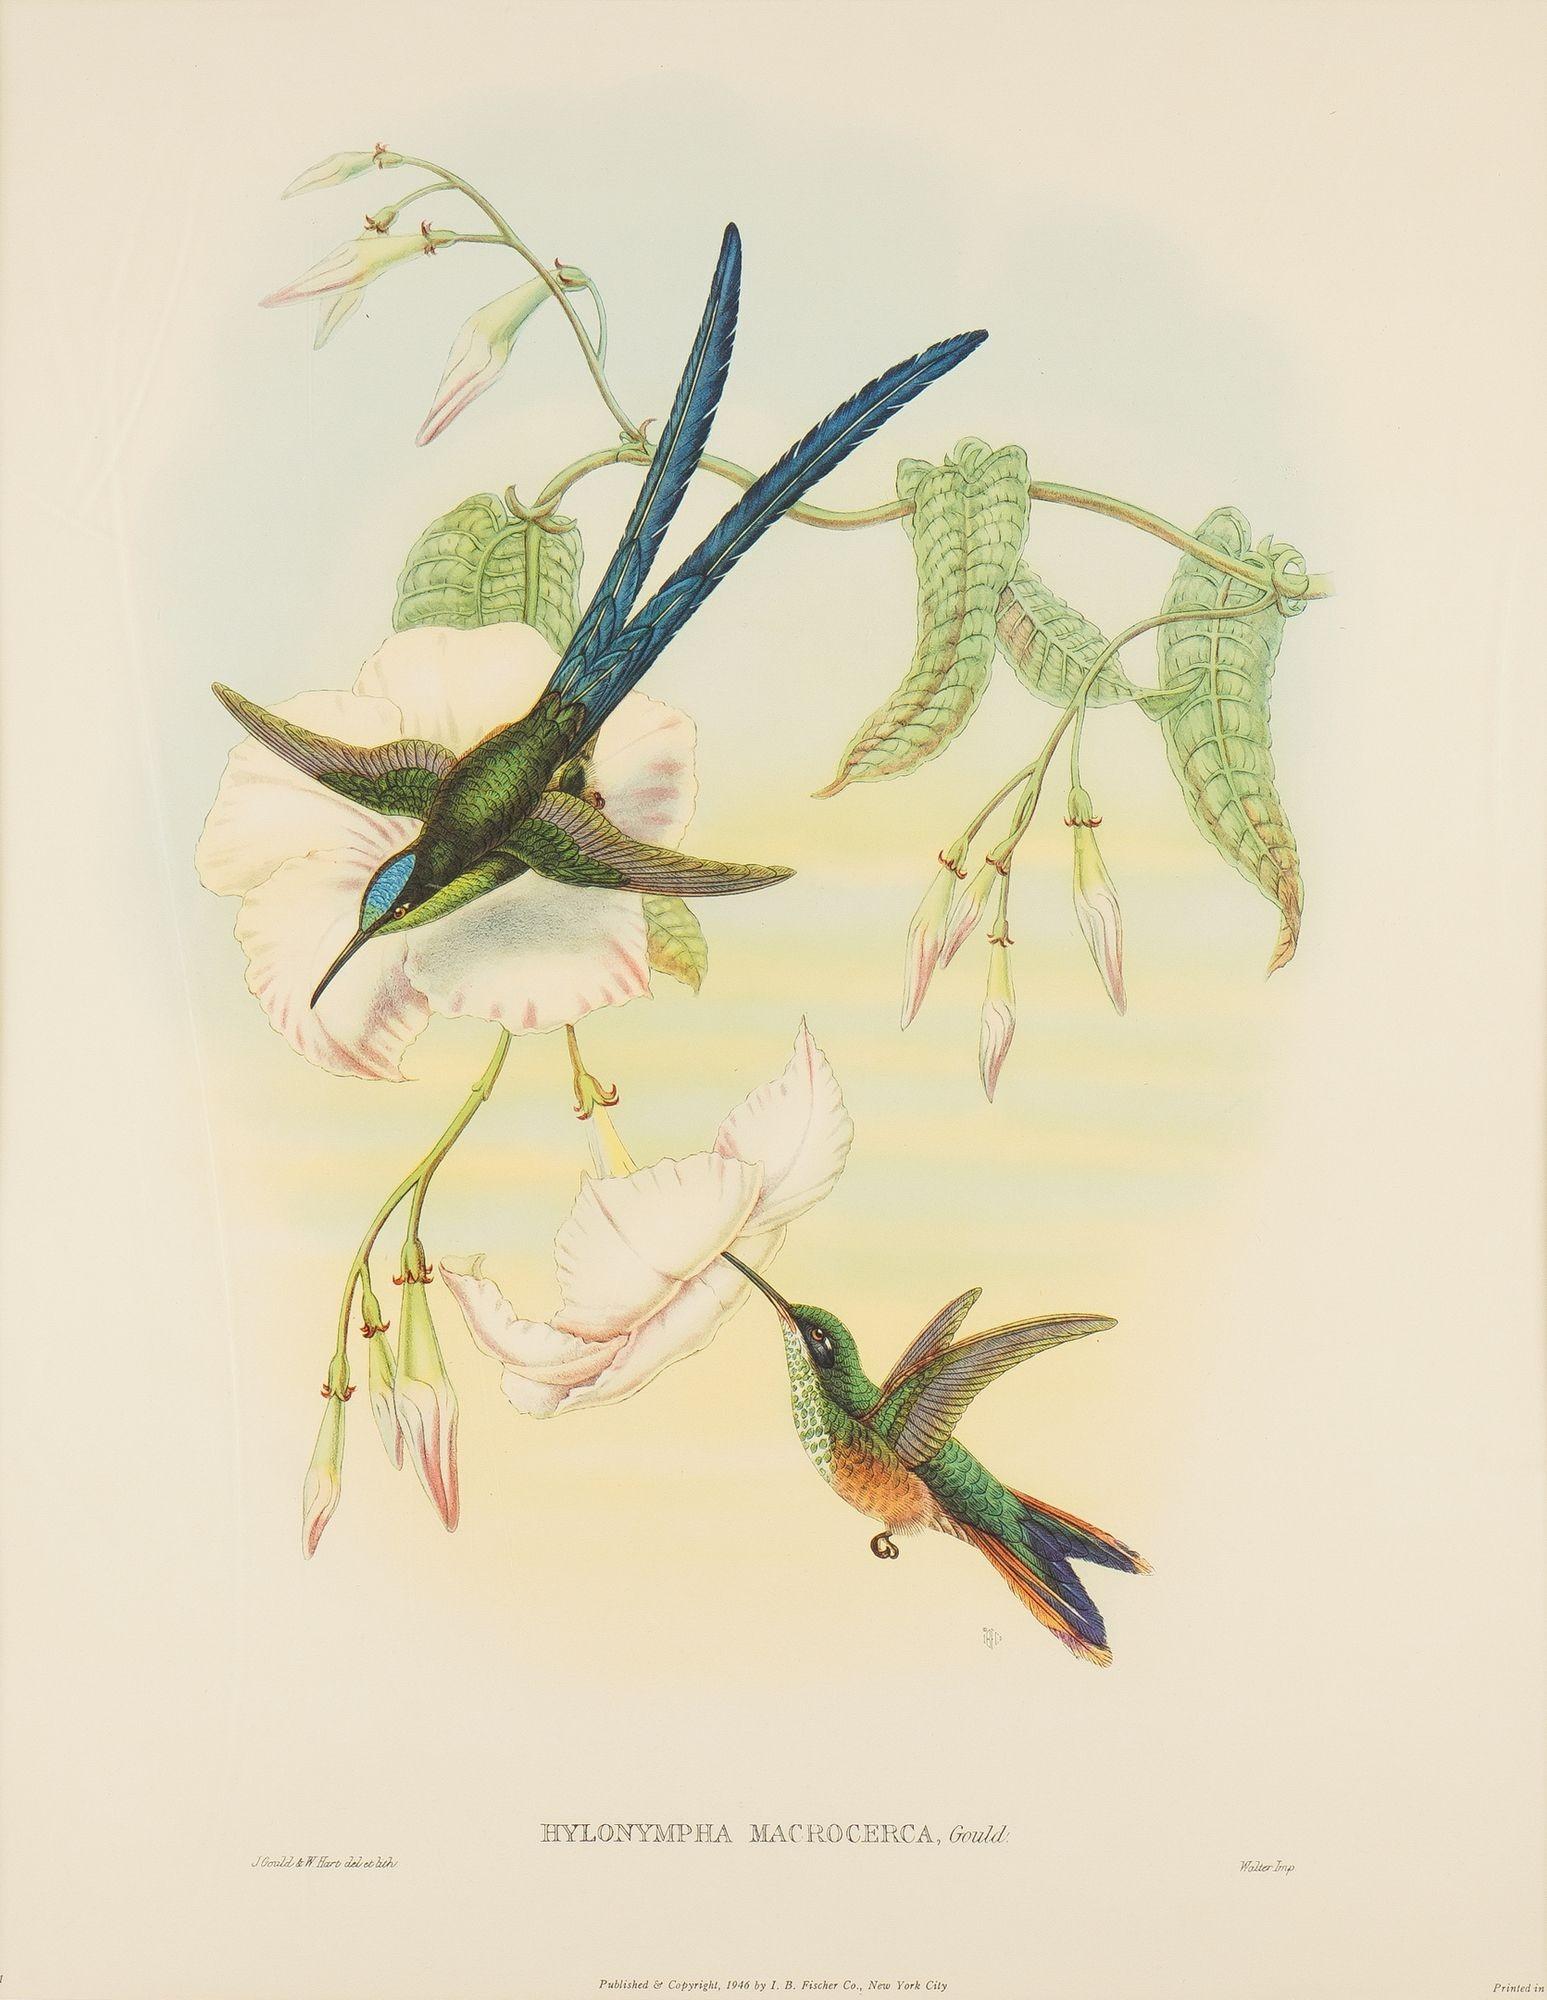 An ornithological lithographic print of the Scissor-Tailed Hummingbird from John Gould 's “A Monogram of the Trochilidae, or Family of Hummingbirds,” published in five volumes from 1861 to 1887, though this print is a mid-20th Century American